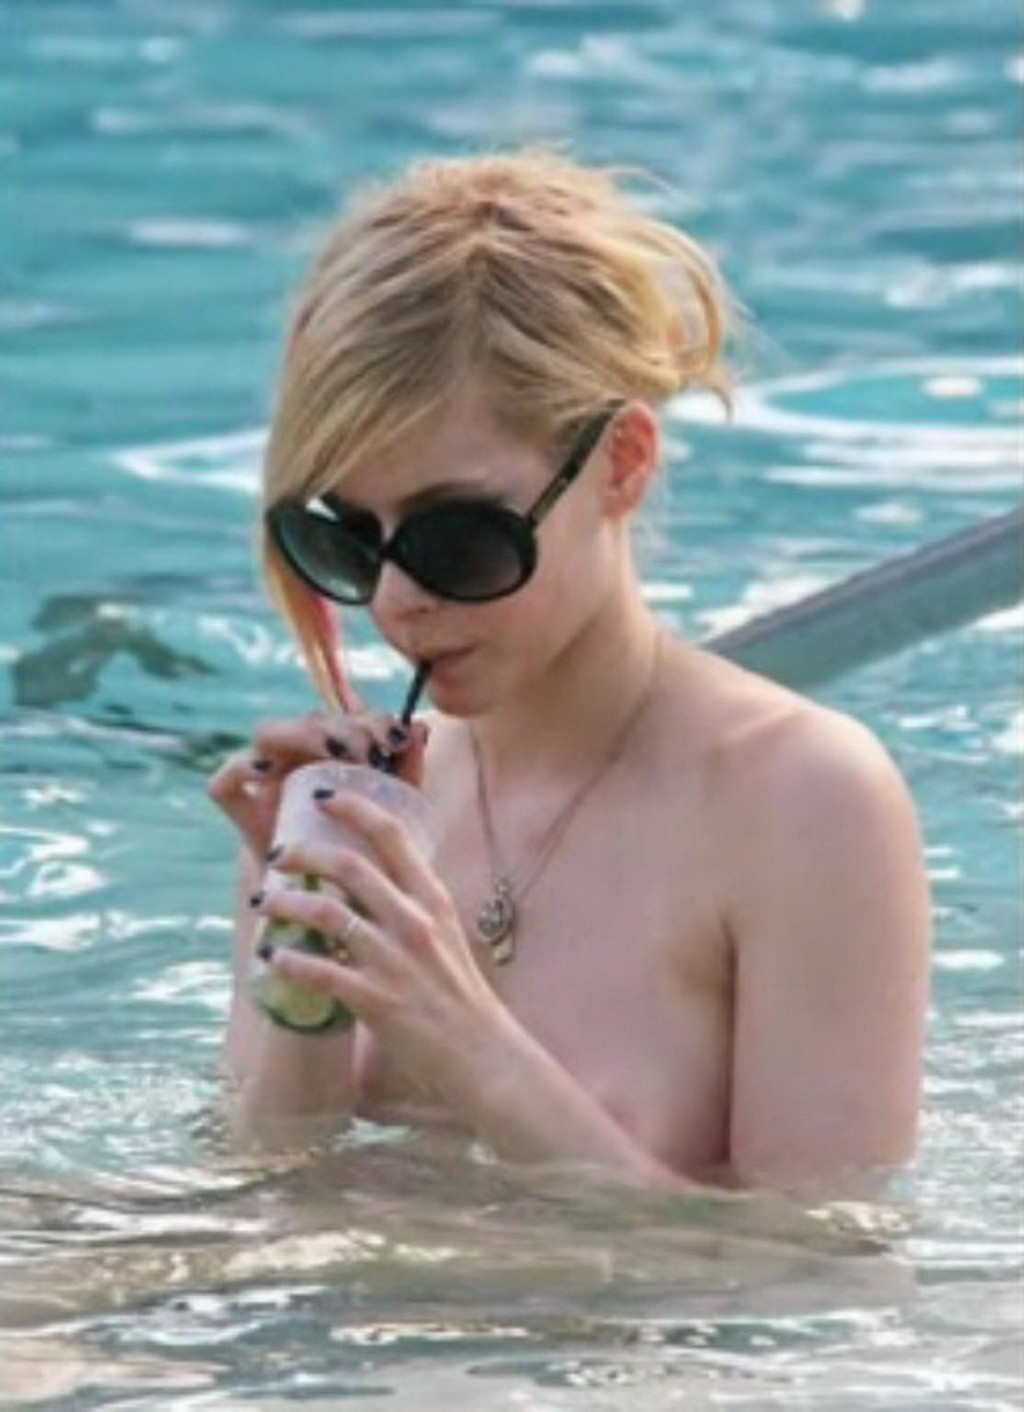 Avril Lavigne caught naked in the pool with her friend